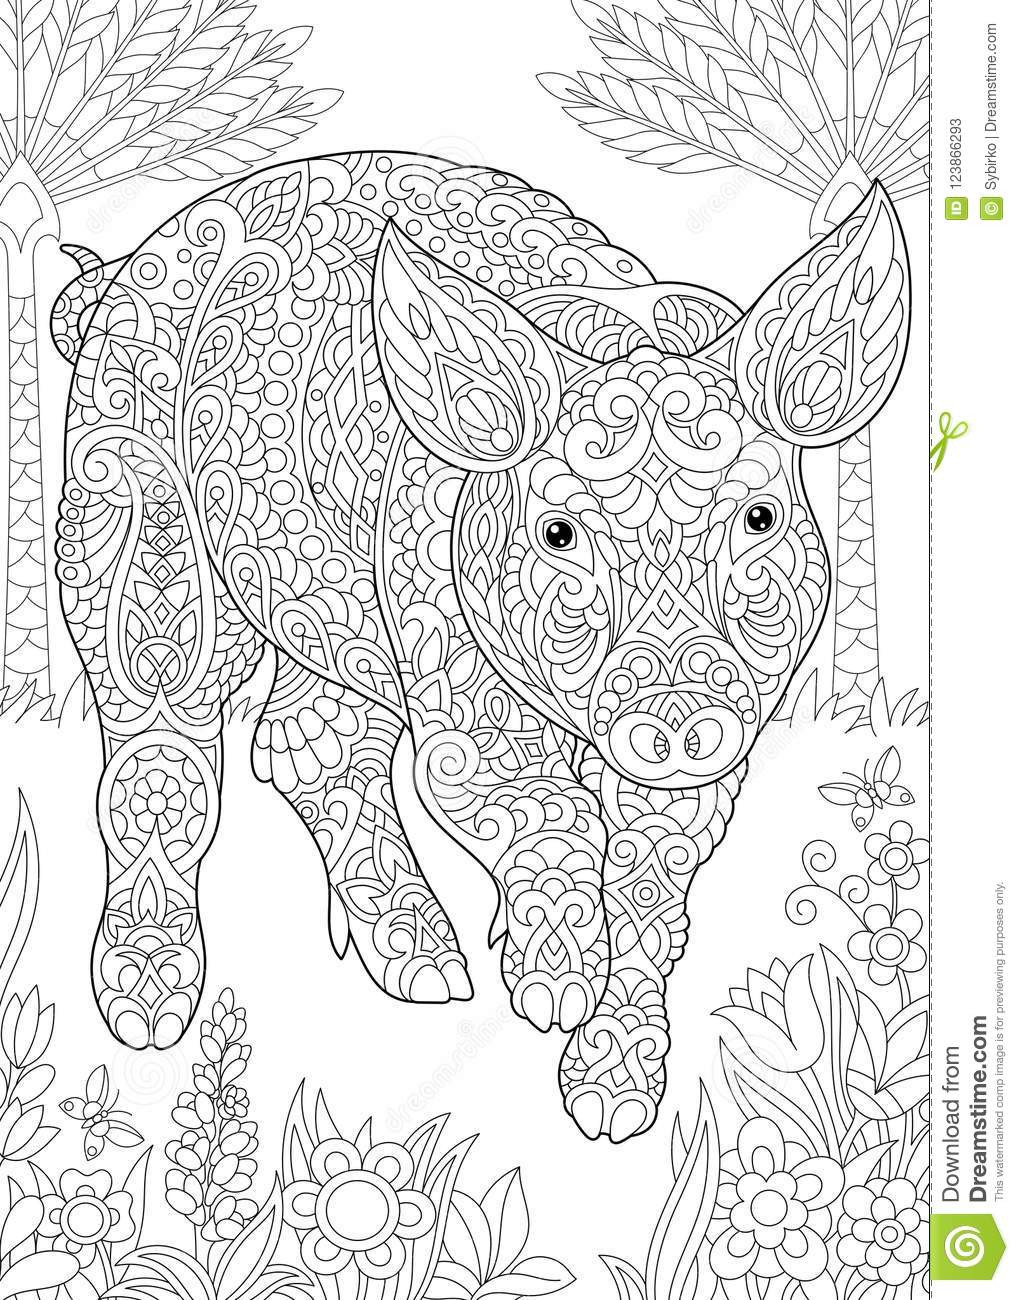 Pig Coloring Pages For Adults
 Zentangle pig piggy hog stock vector Illustration of